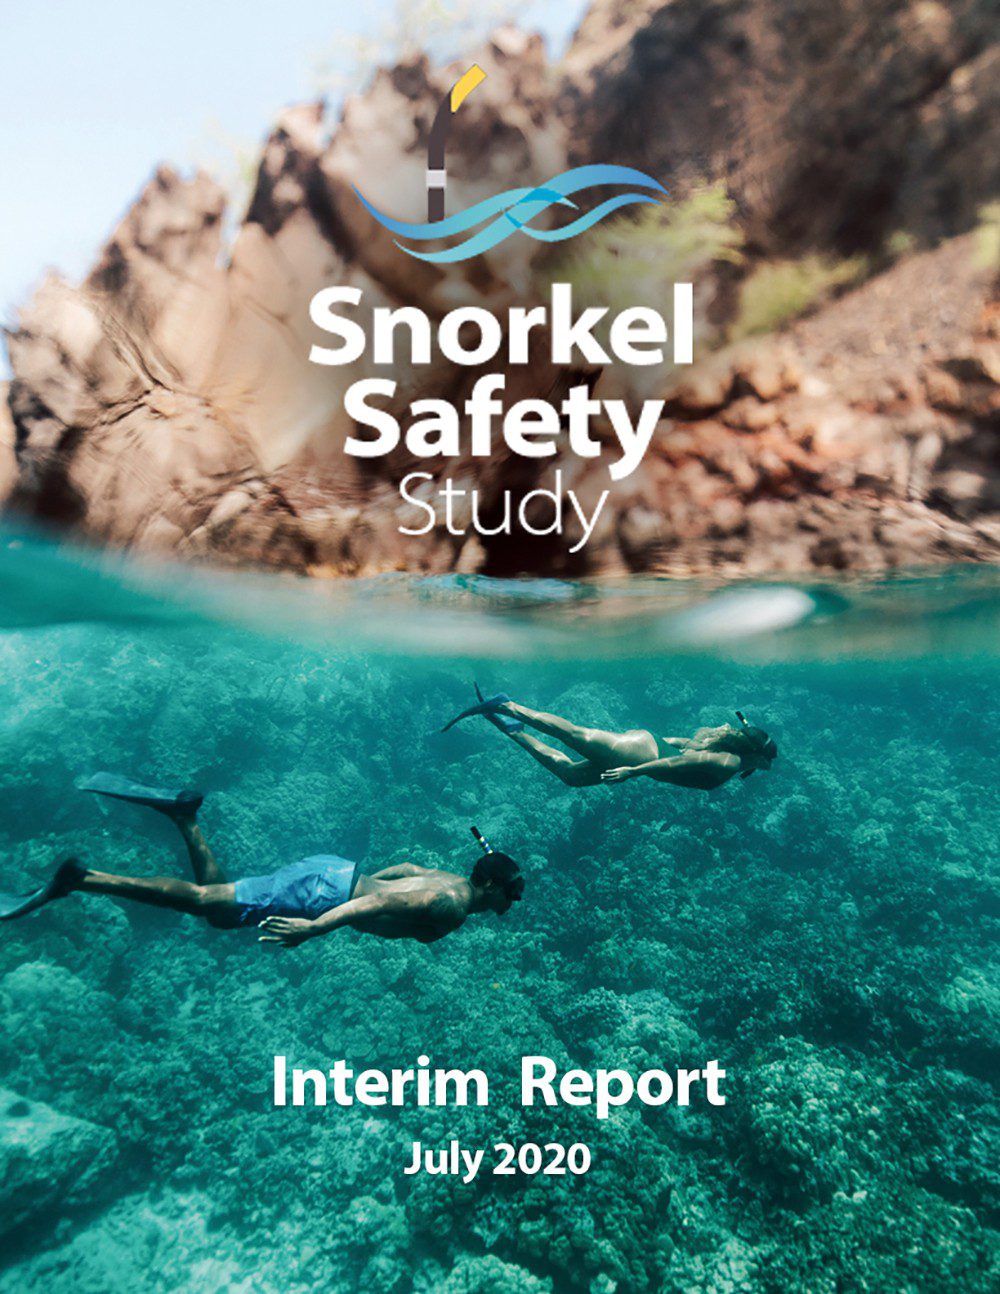 The report that first drew attention to potential pitfalls for snorkellers.